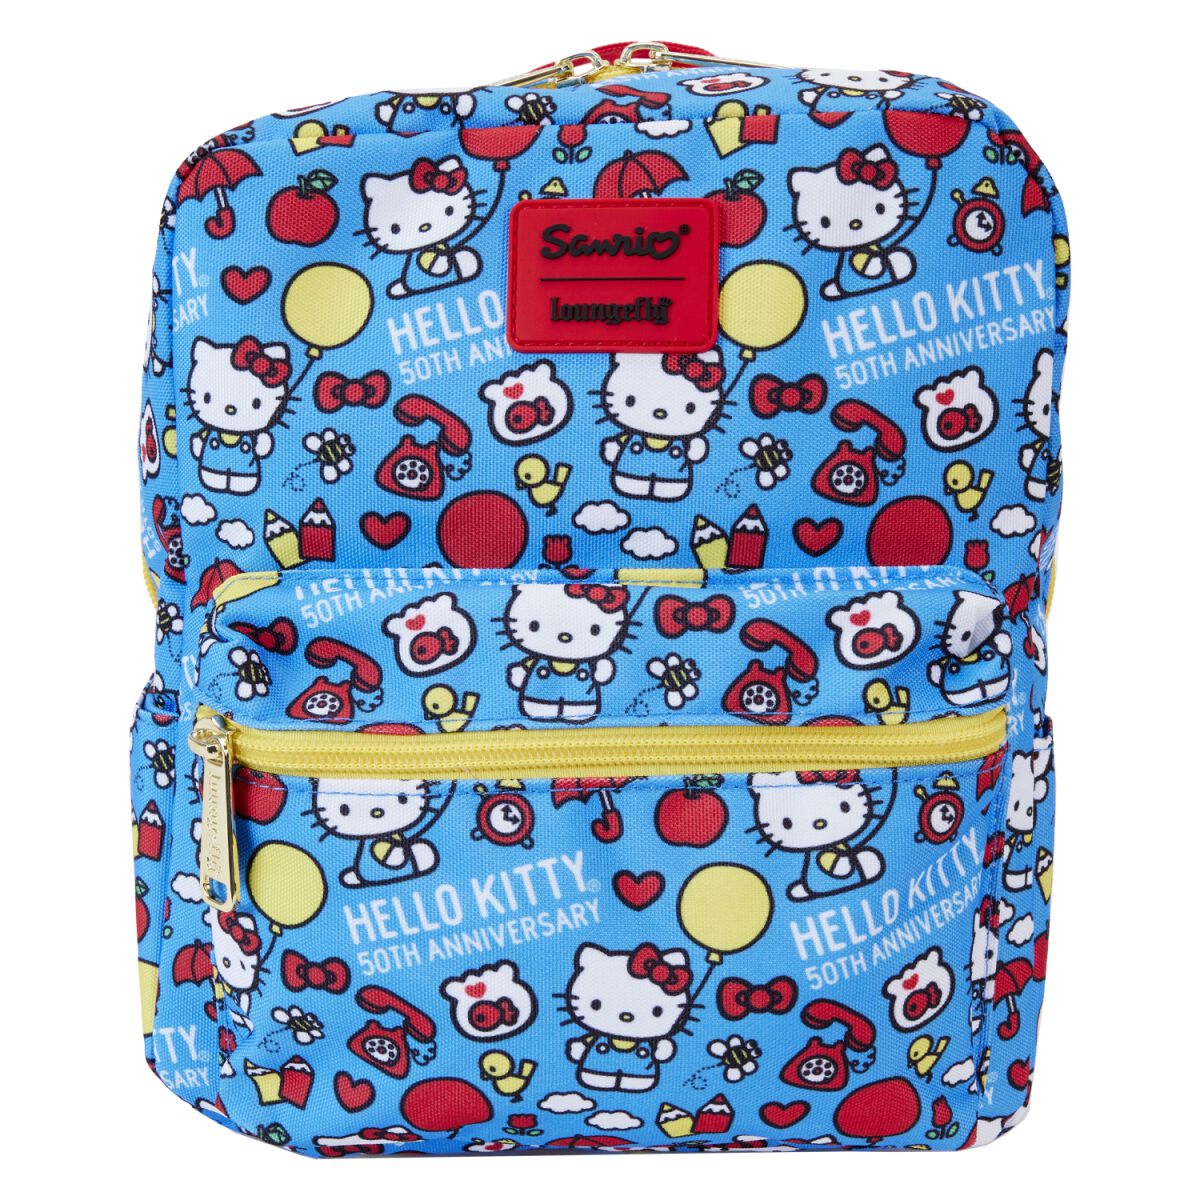 Hello Kitty Loungefly - Classic AOP Nylon Square (50th Anniversary) Rucksack multicolor